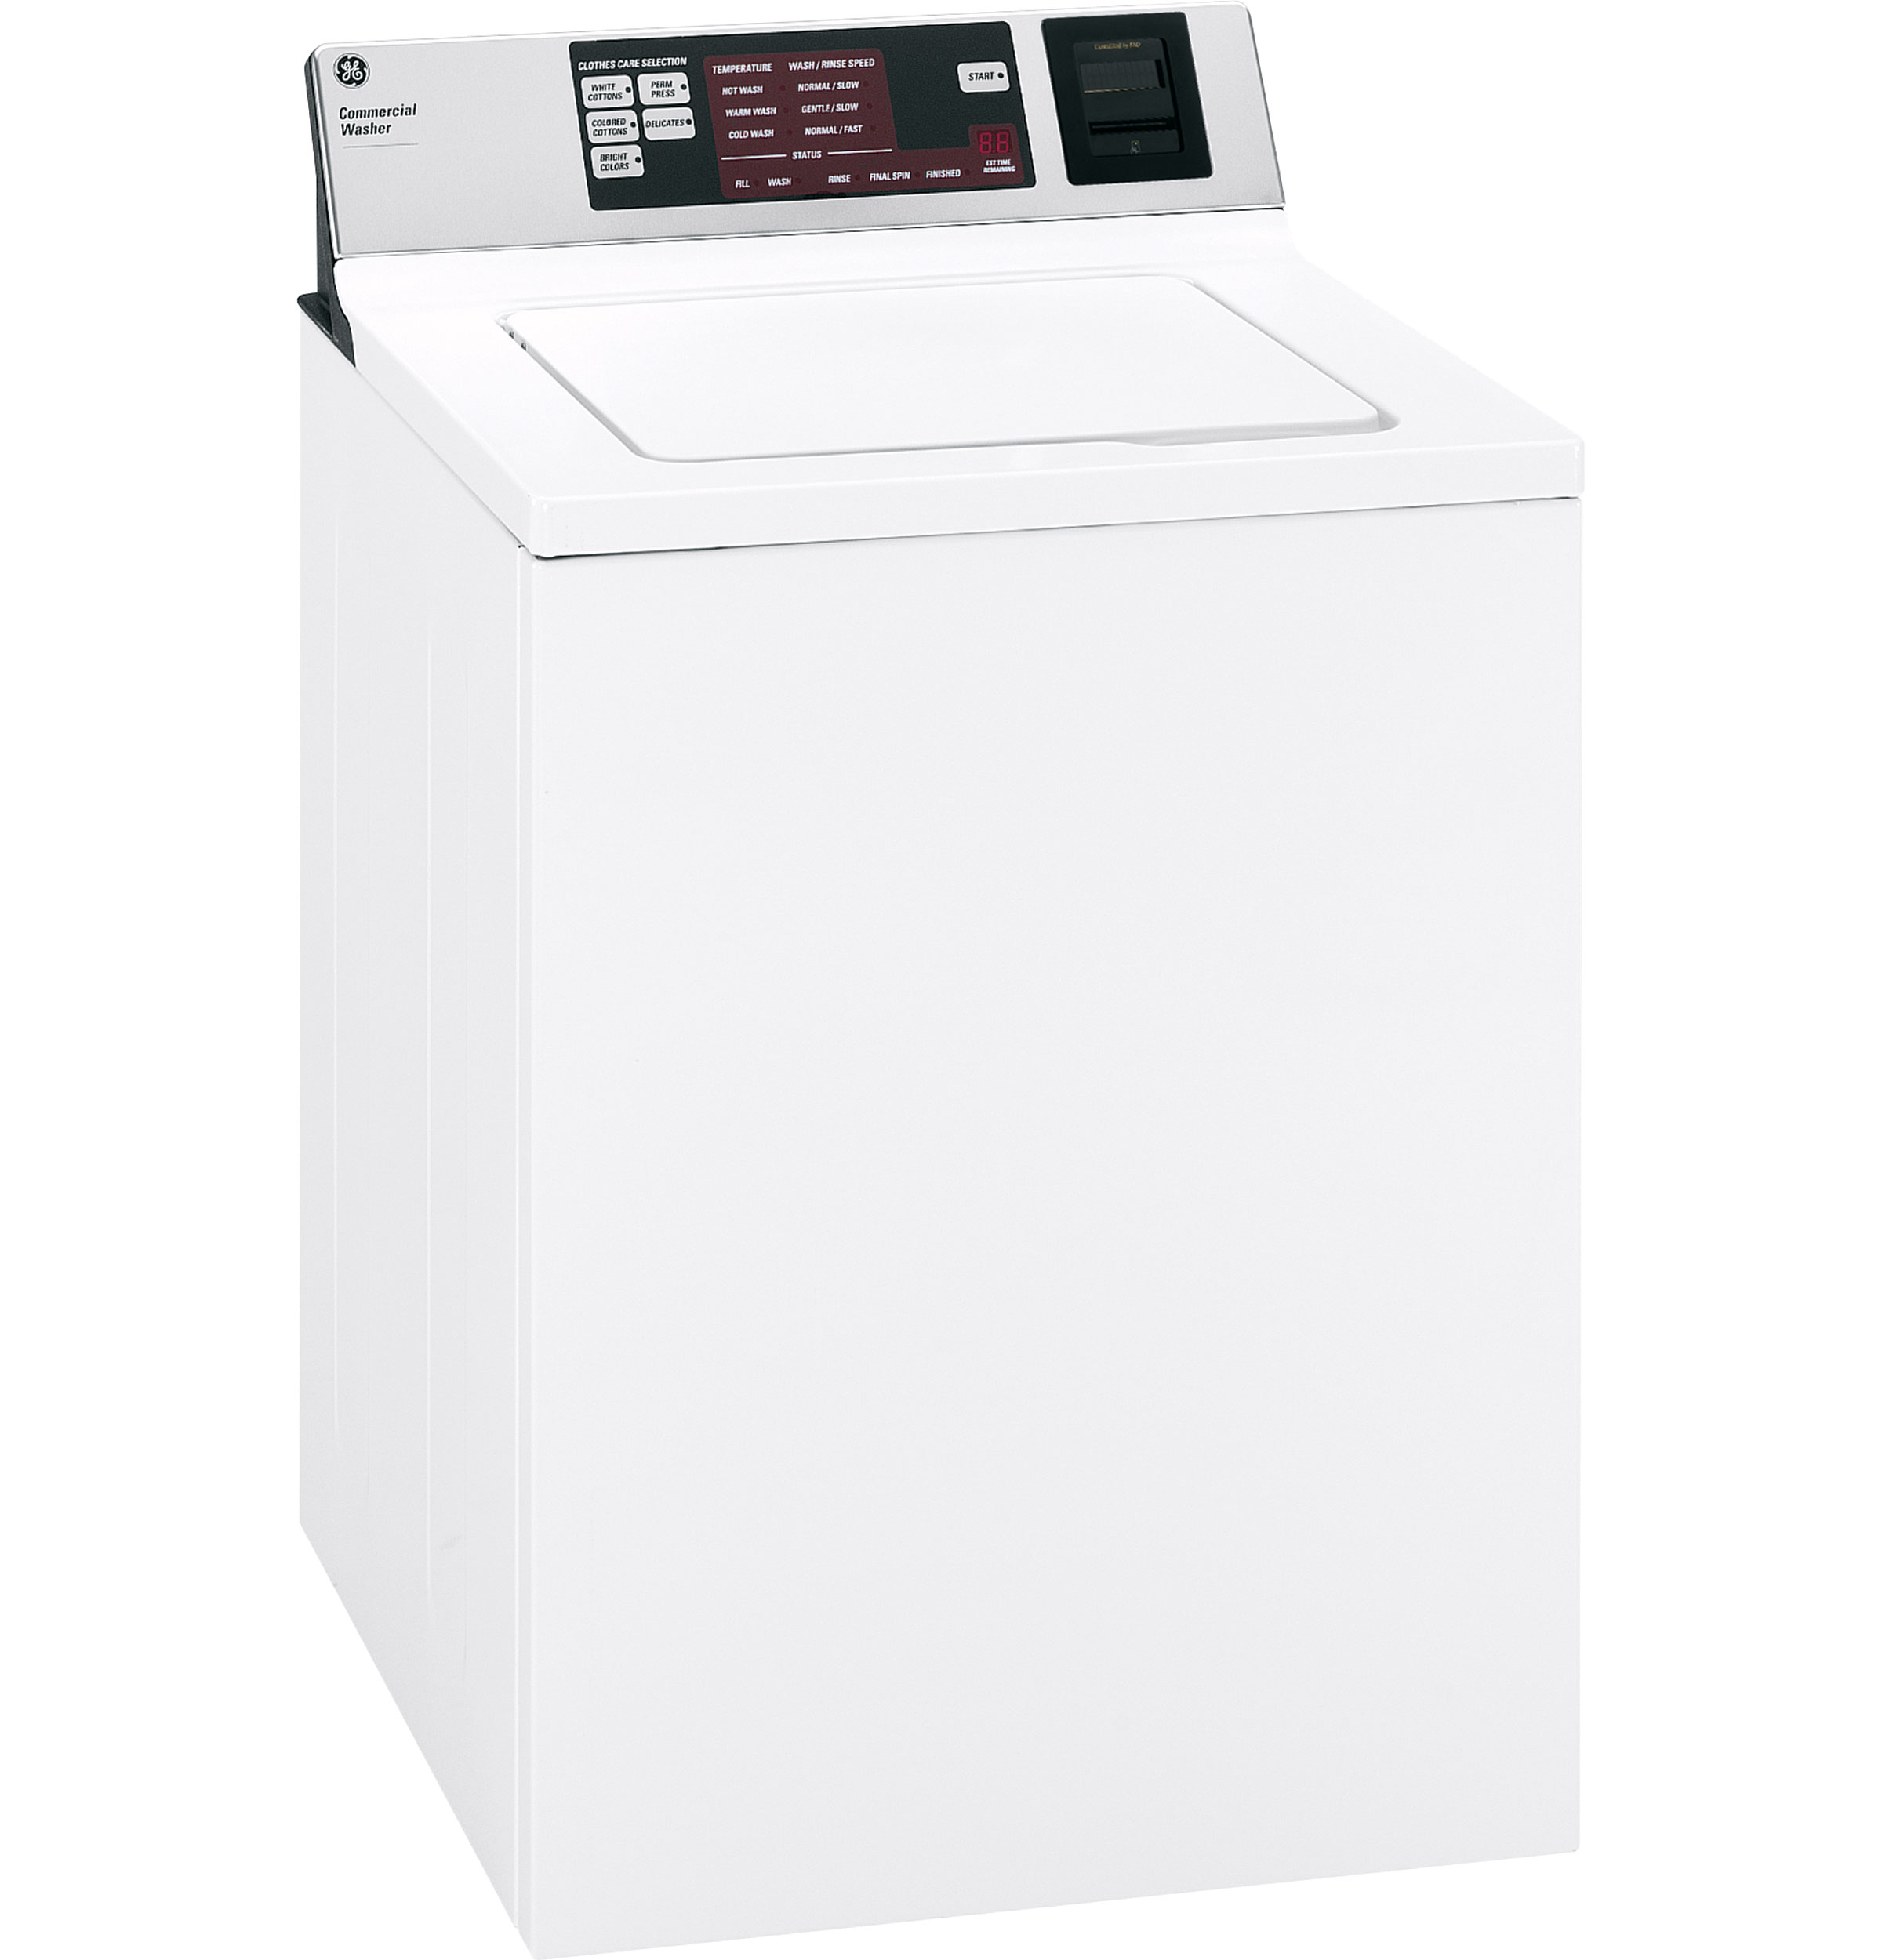 GE® Extra-Large 2.7 cu. ft. Capacity Commercial ESD Smart Card Washer